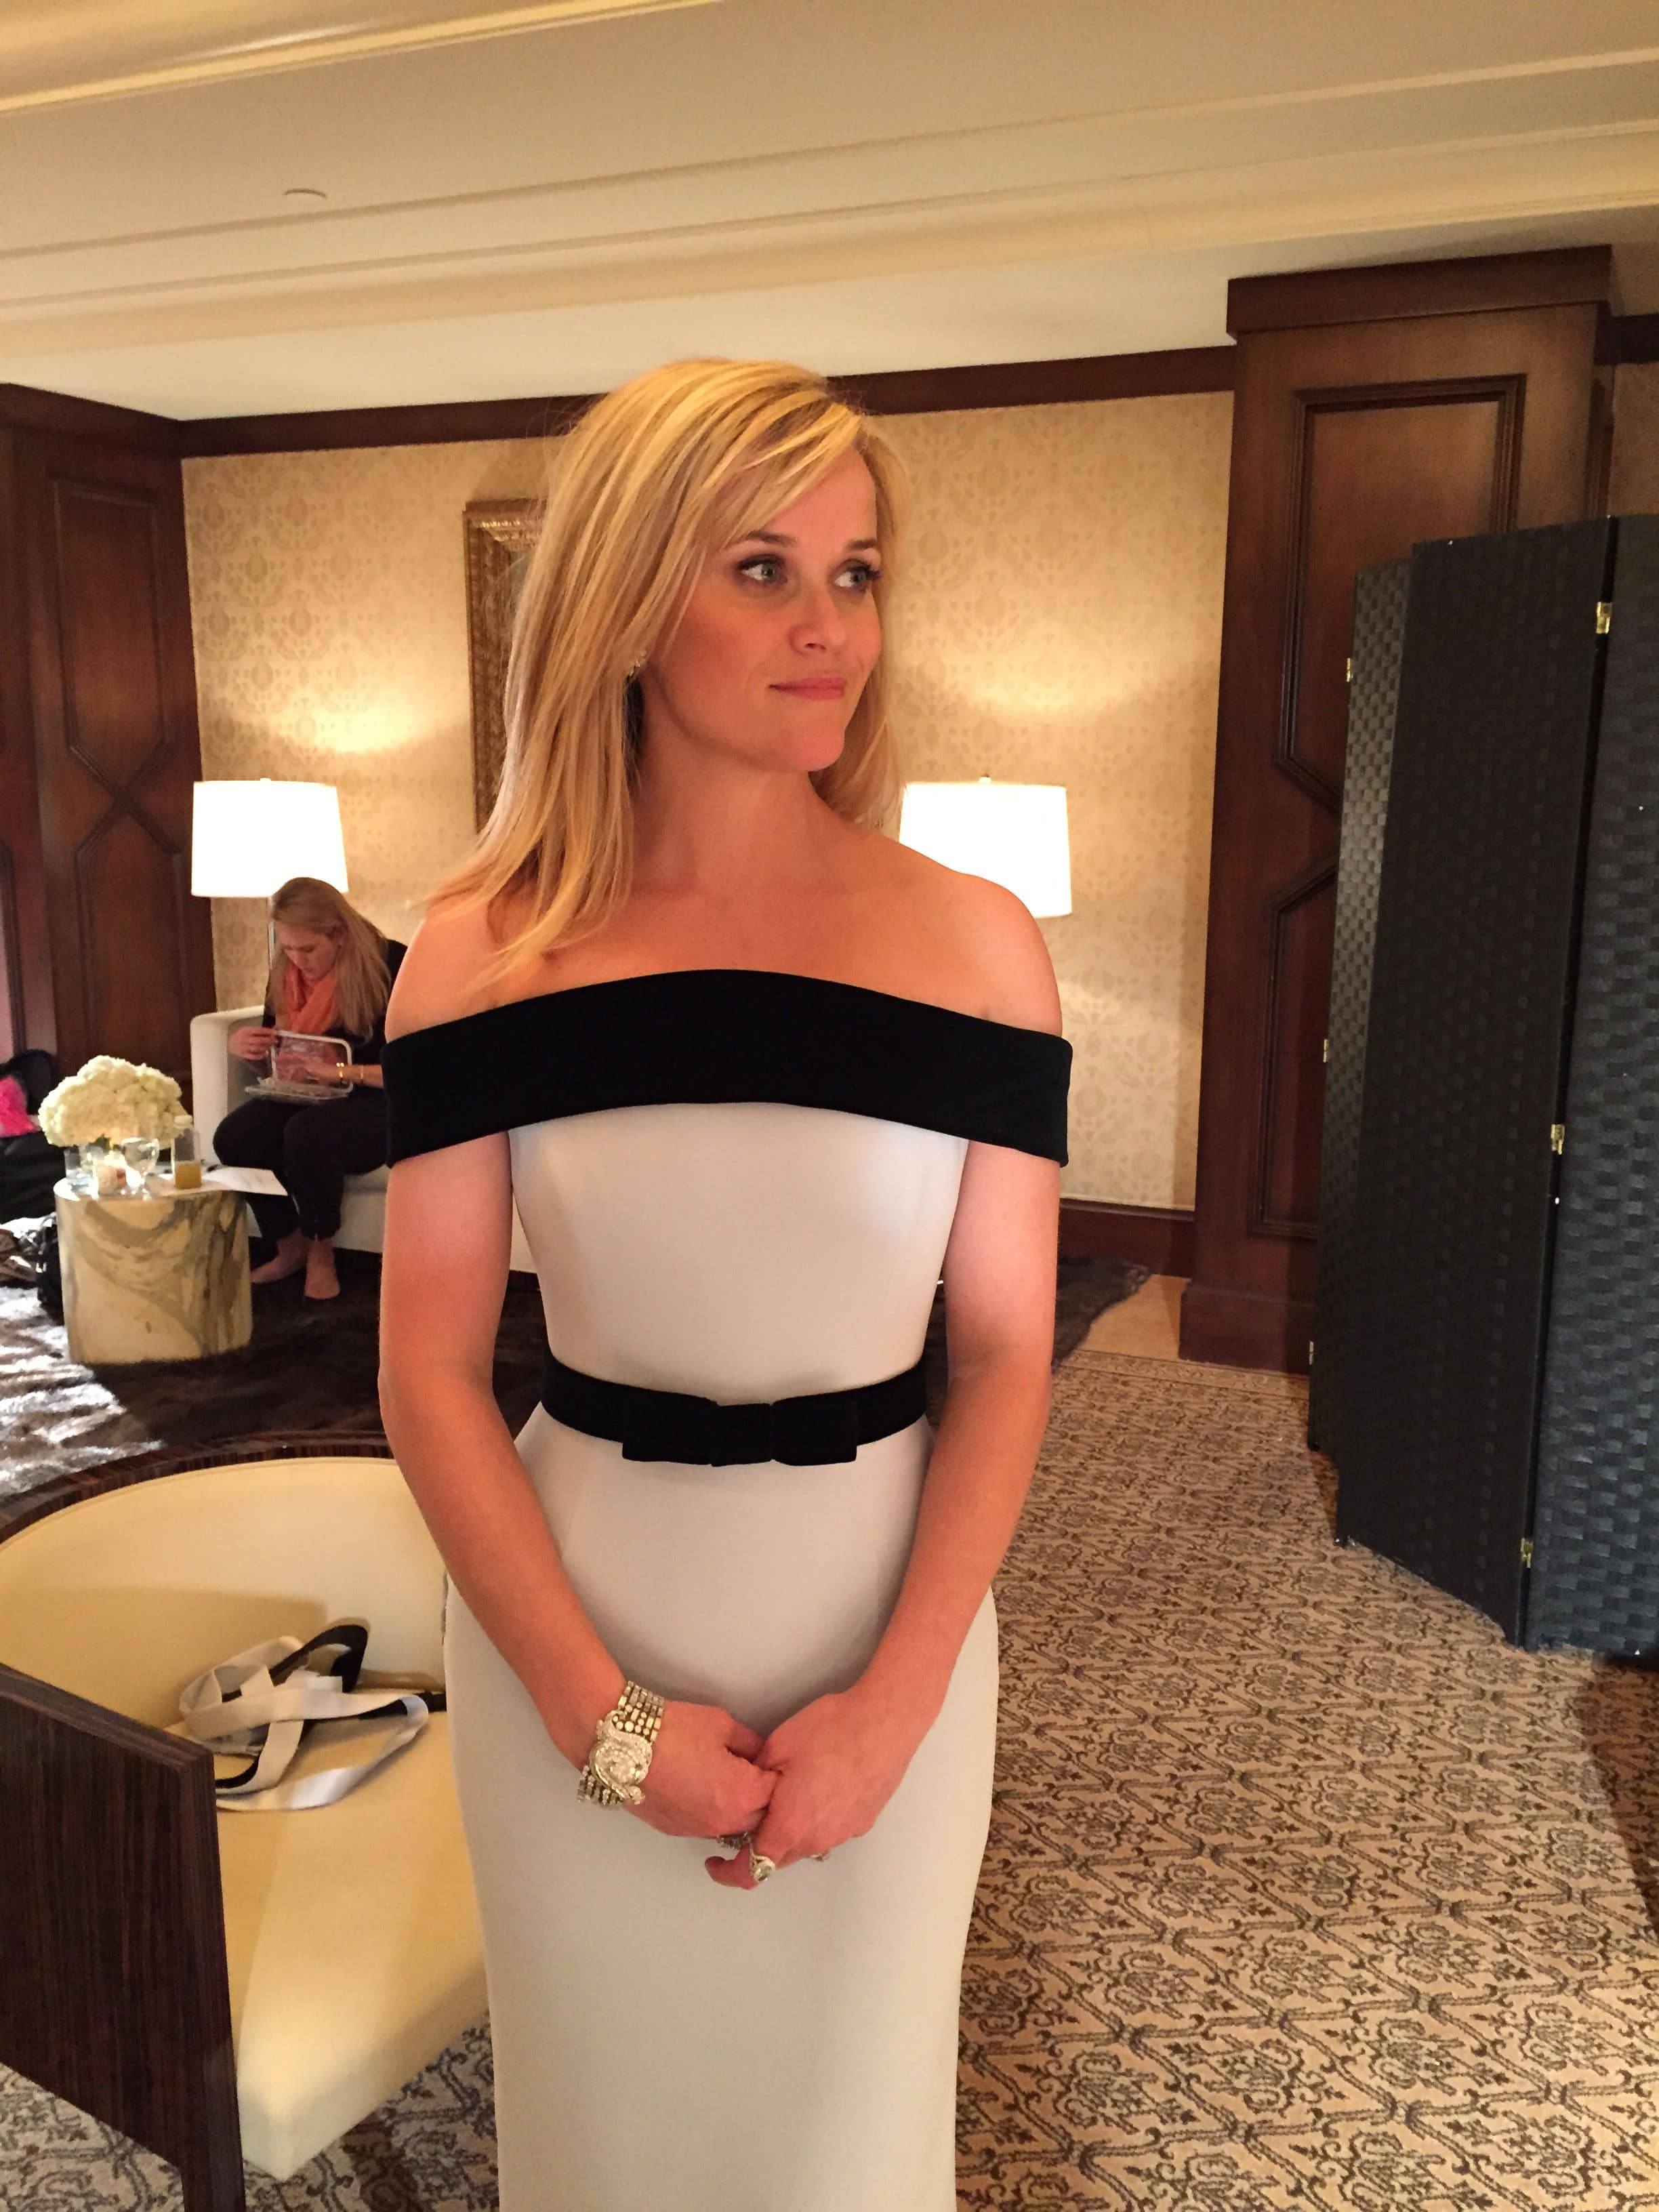 Reese Witherspoon boobs show